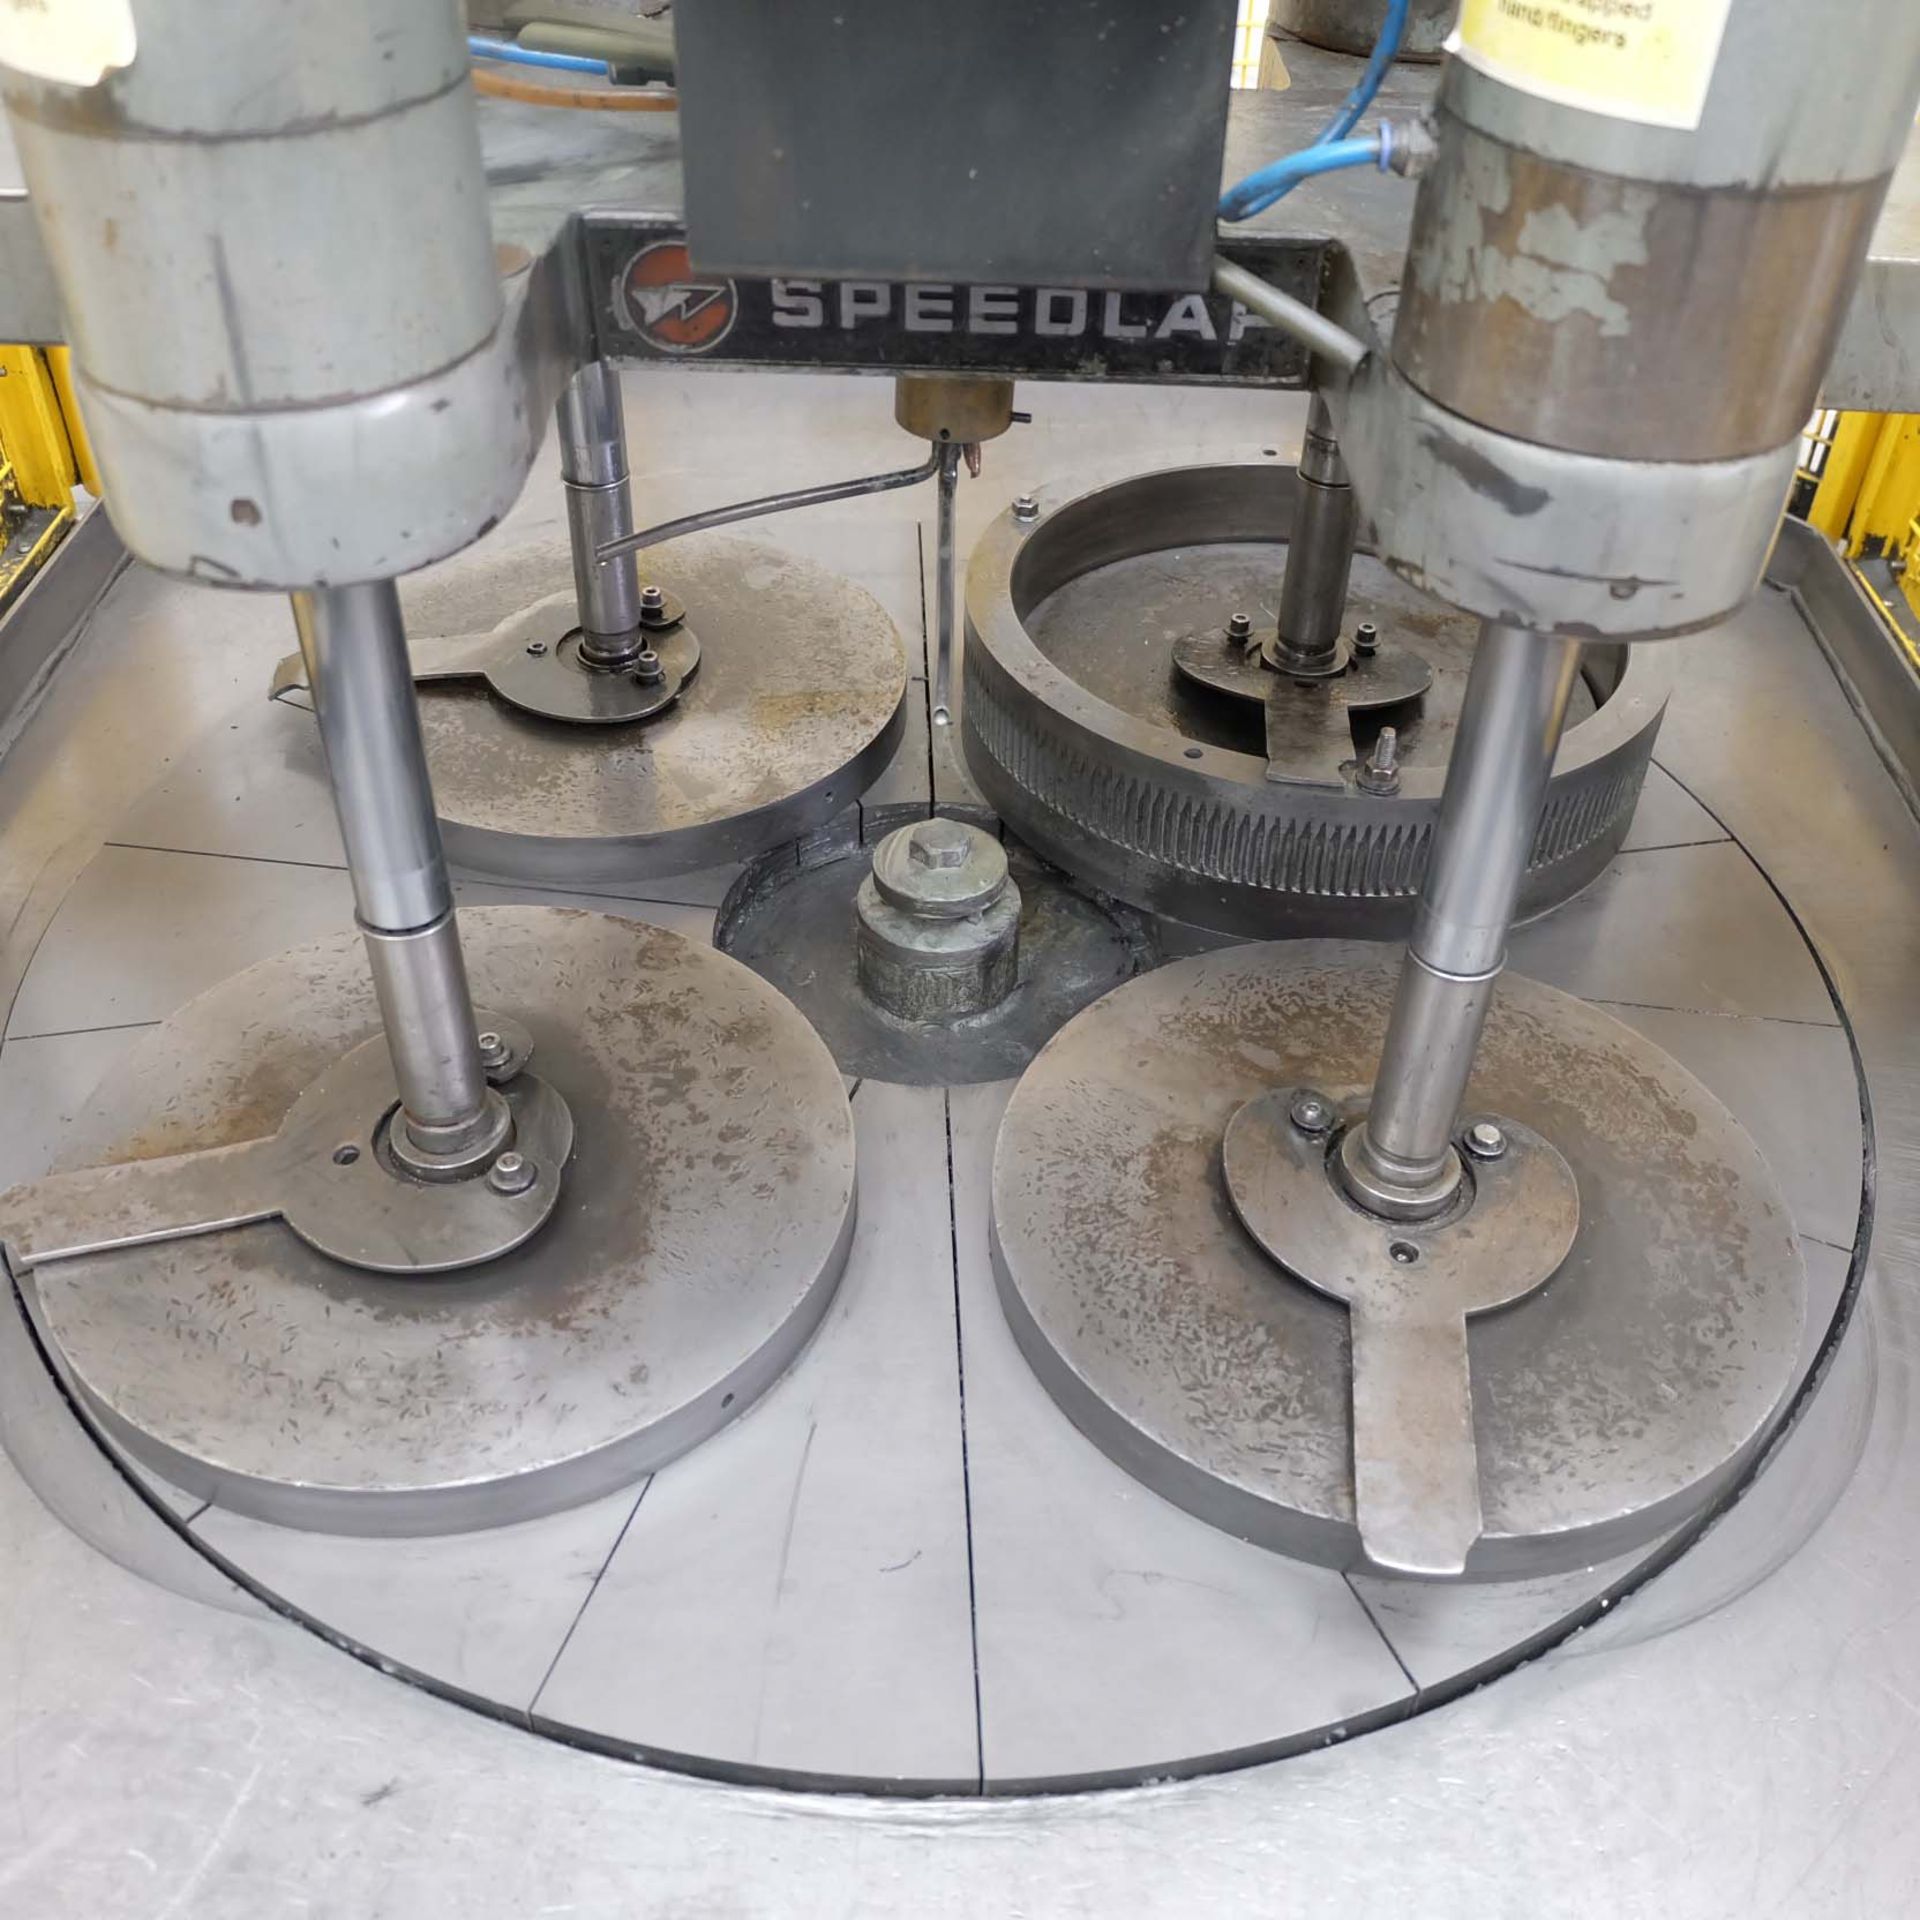 Speedfam Model Speedlap 32 Rotary Table Lapping Machine With Four Pneumatic Power Hold Downs. Table - Image 4 of 9